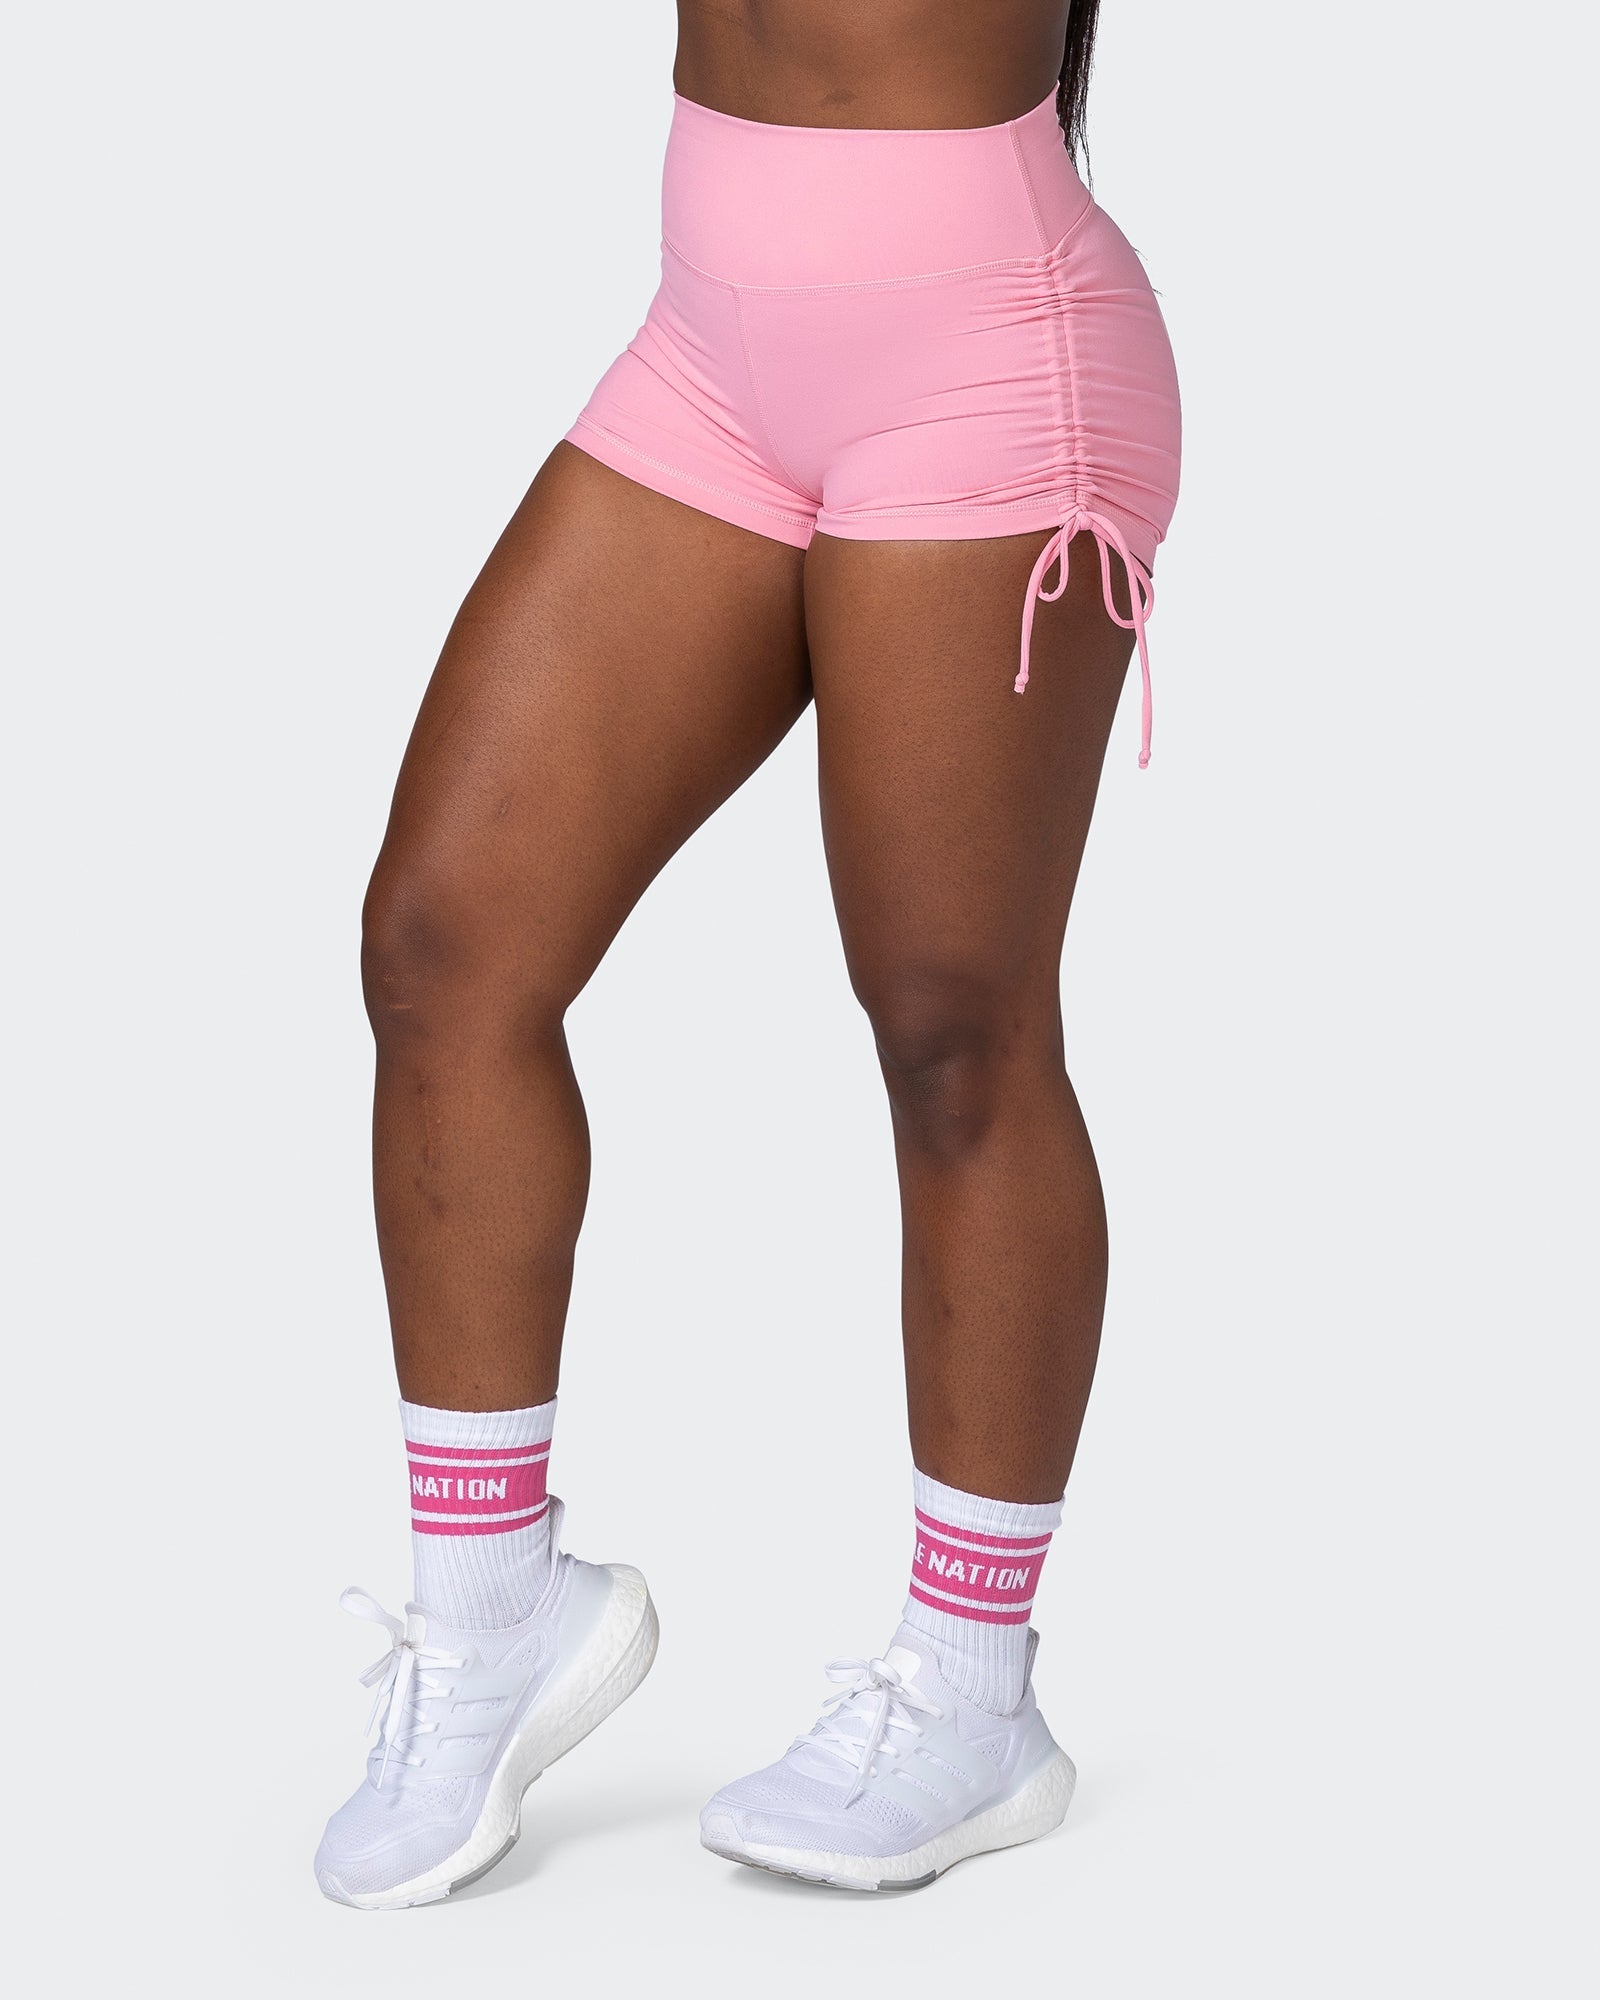 musclenation Shorts Signature Scrunch Tie Up Booty Shorts - Strawberry Pink